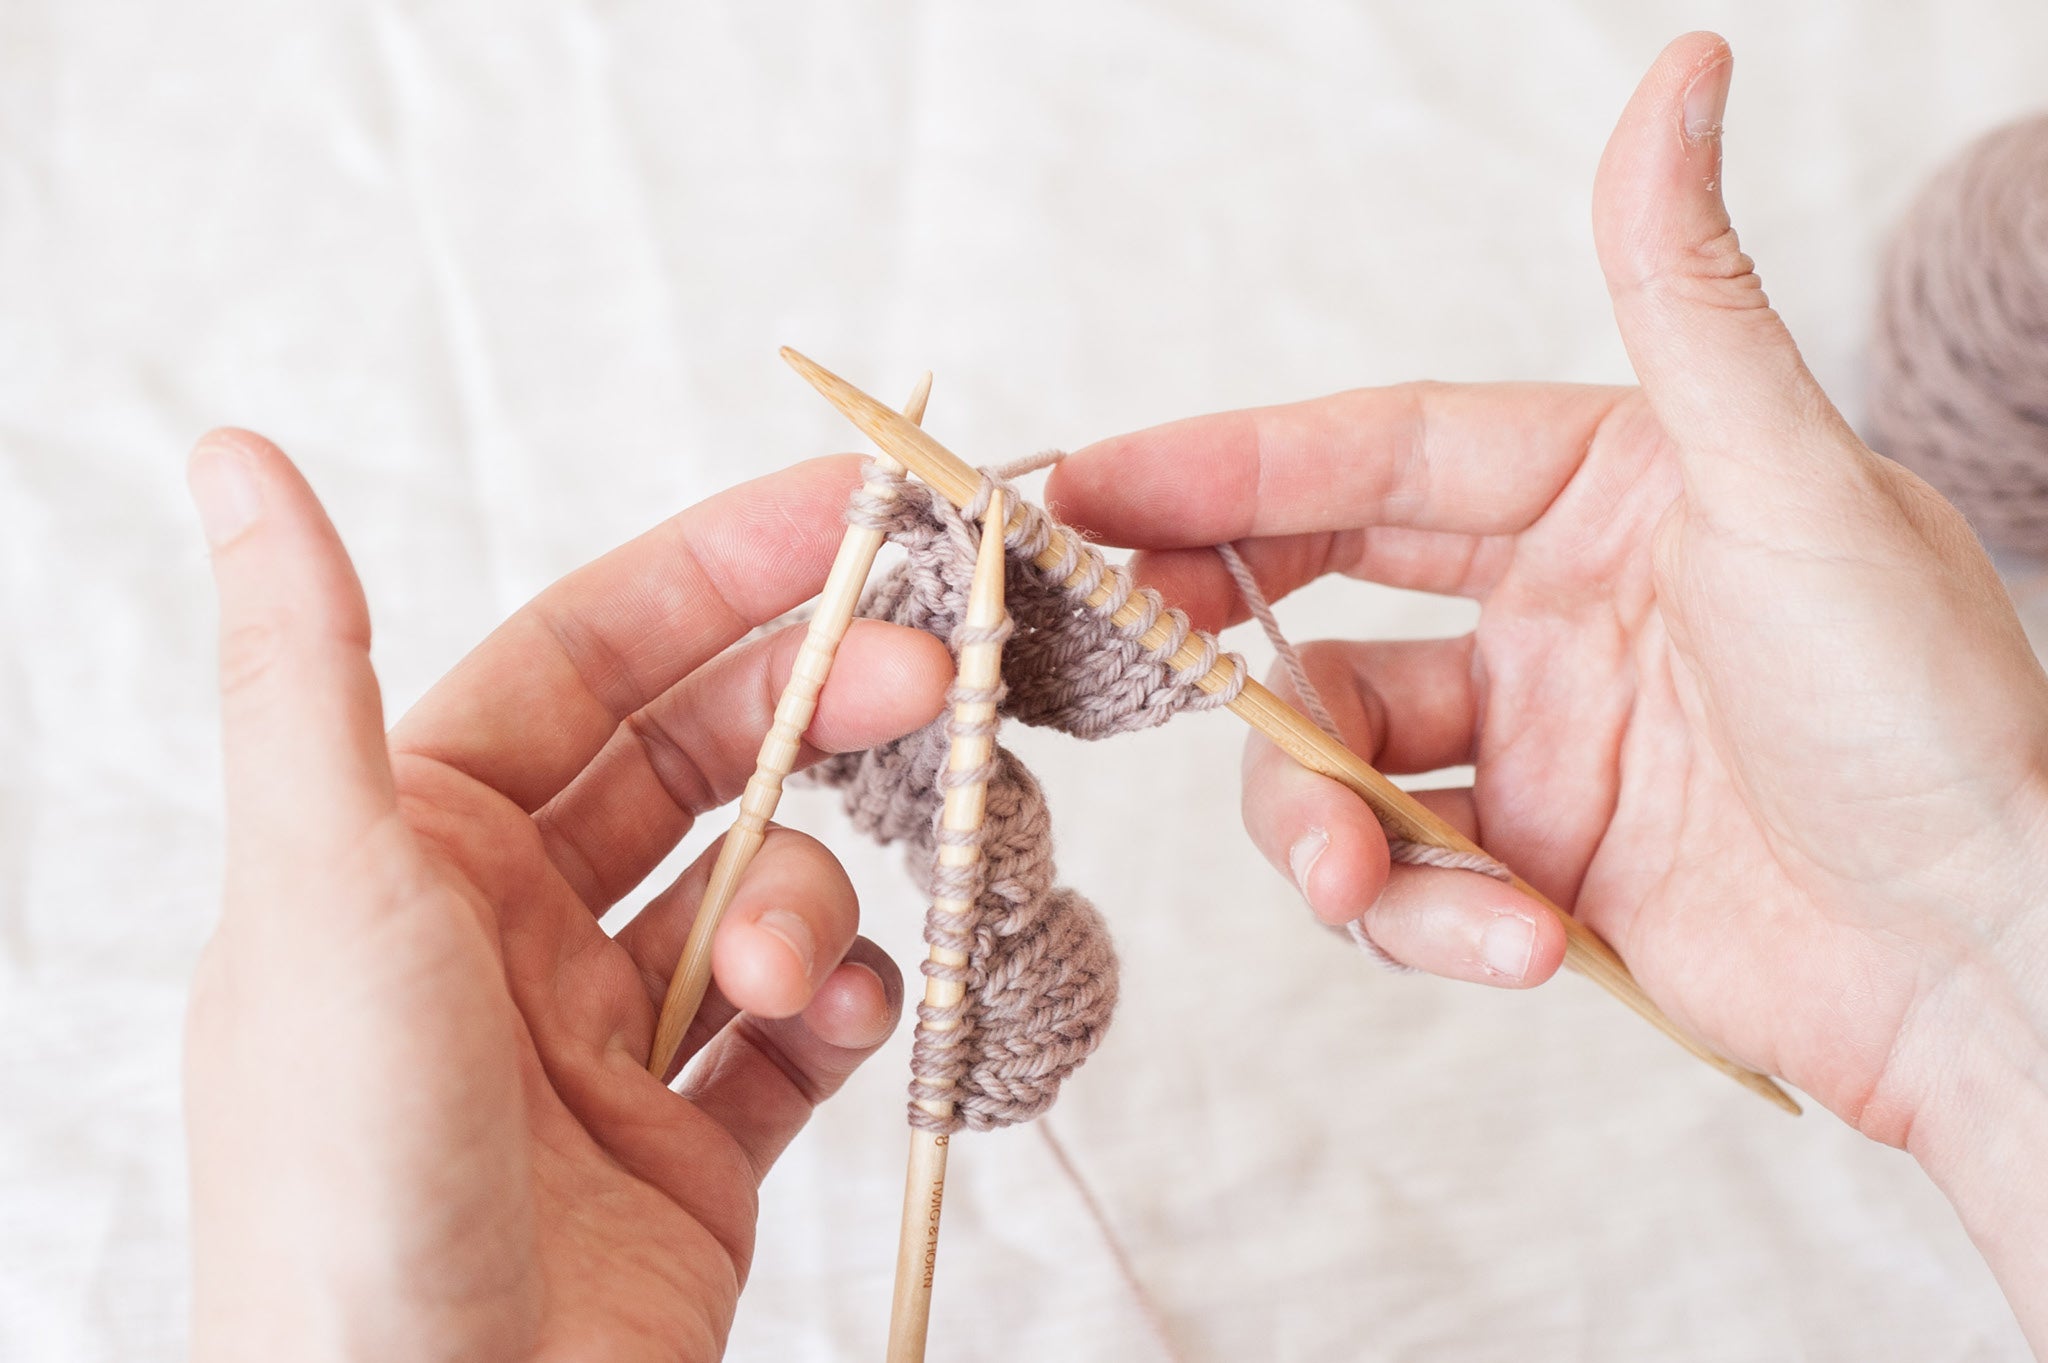 Learn to Knit: Working a Right Cross Cable without a Cable Needle